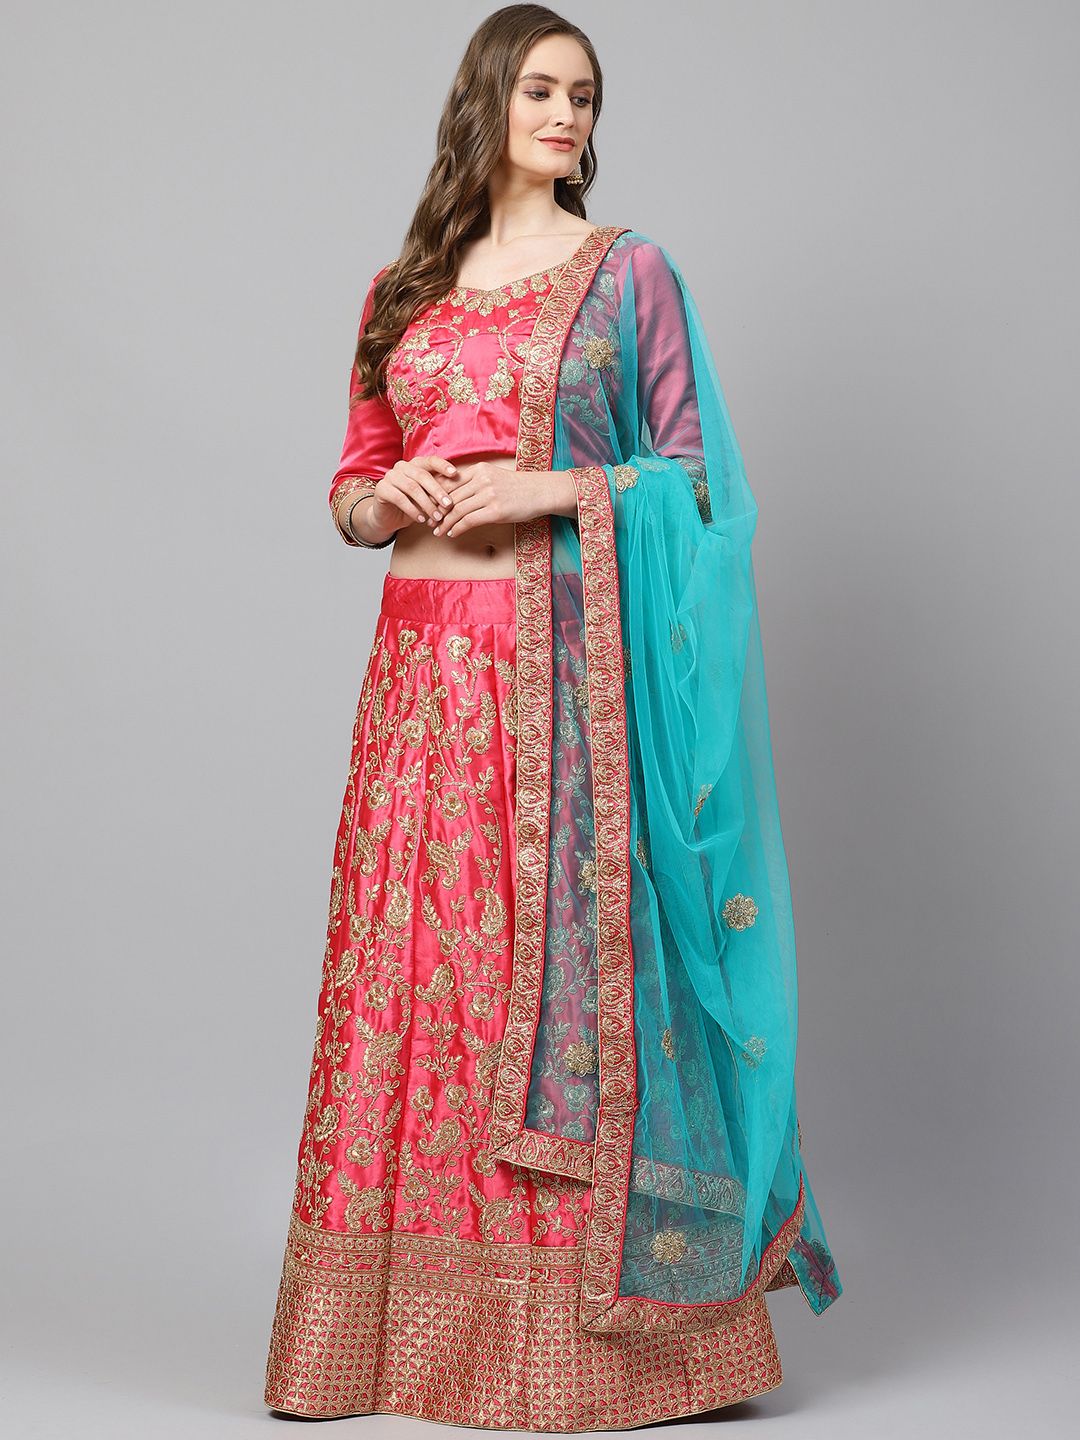 Readiprint Fashions Pink & Gold-Toned Embroidered Semi-Stitched Lehenga & Unstitched Blouse with Dupatta Price in India